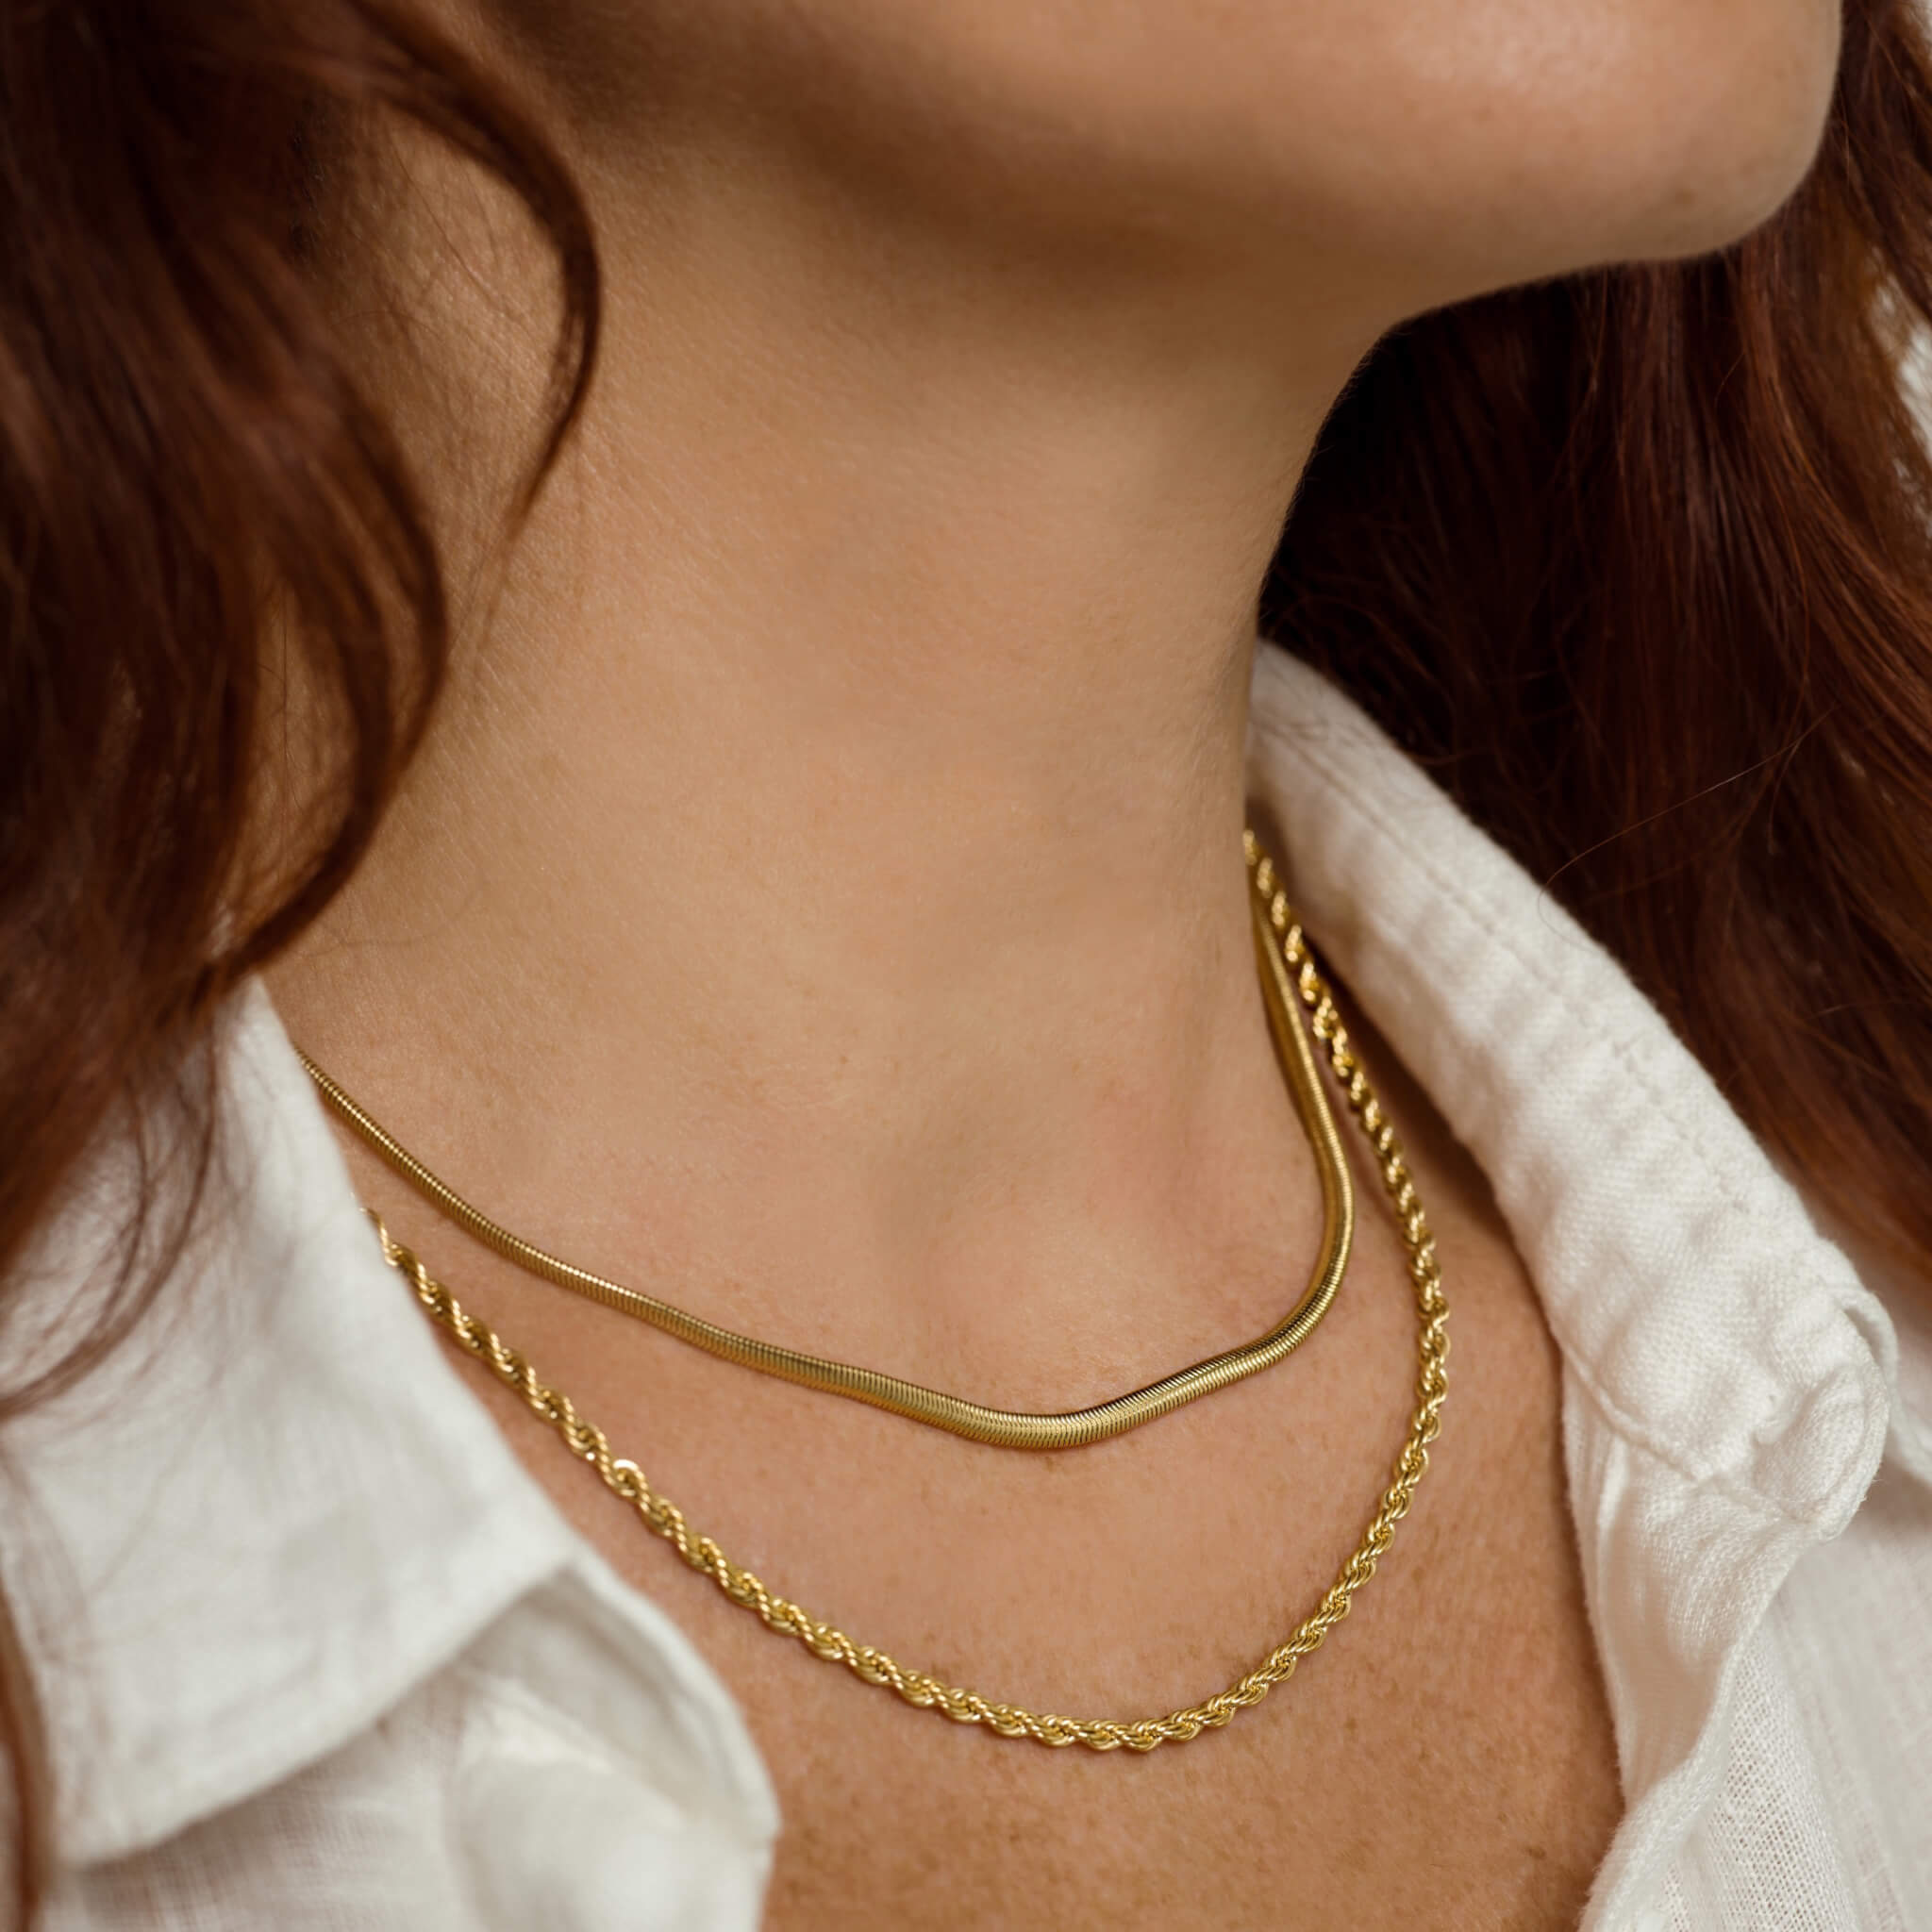 Siren Necklace in Gold on Model